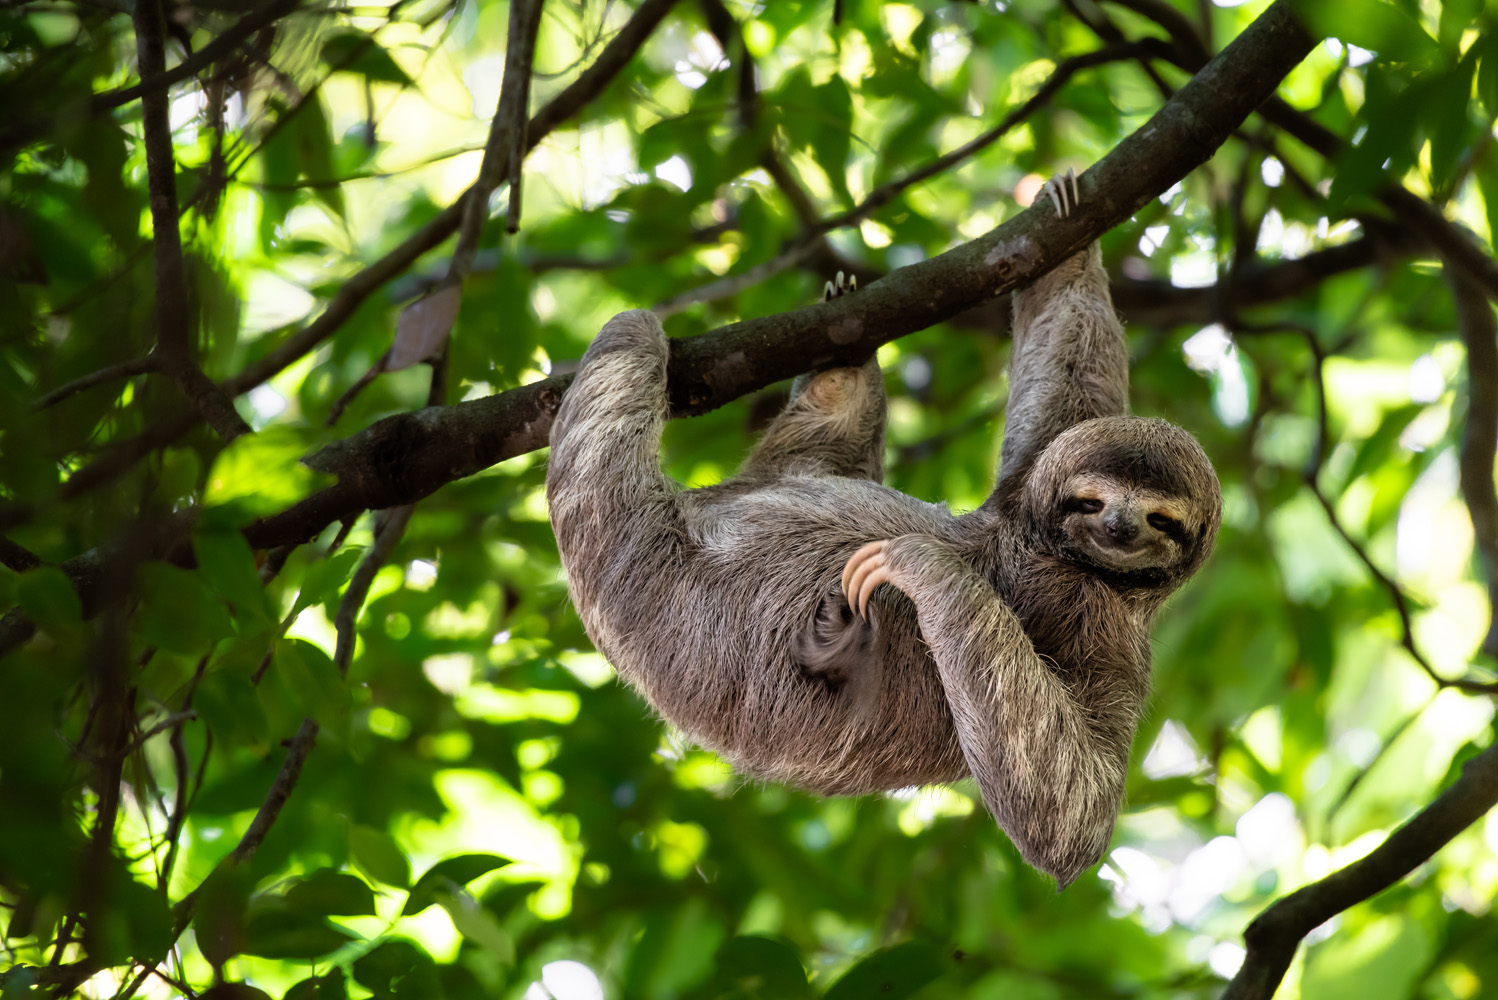 Three toed sloth hanging from branch smiling at camera, in Costa Rica, Llama Travel